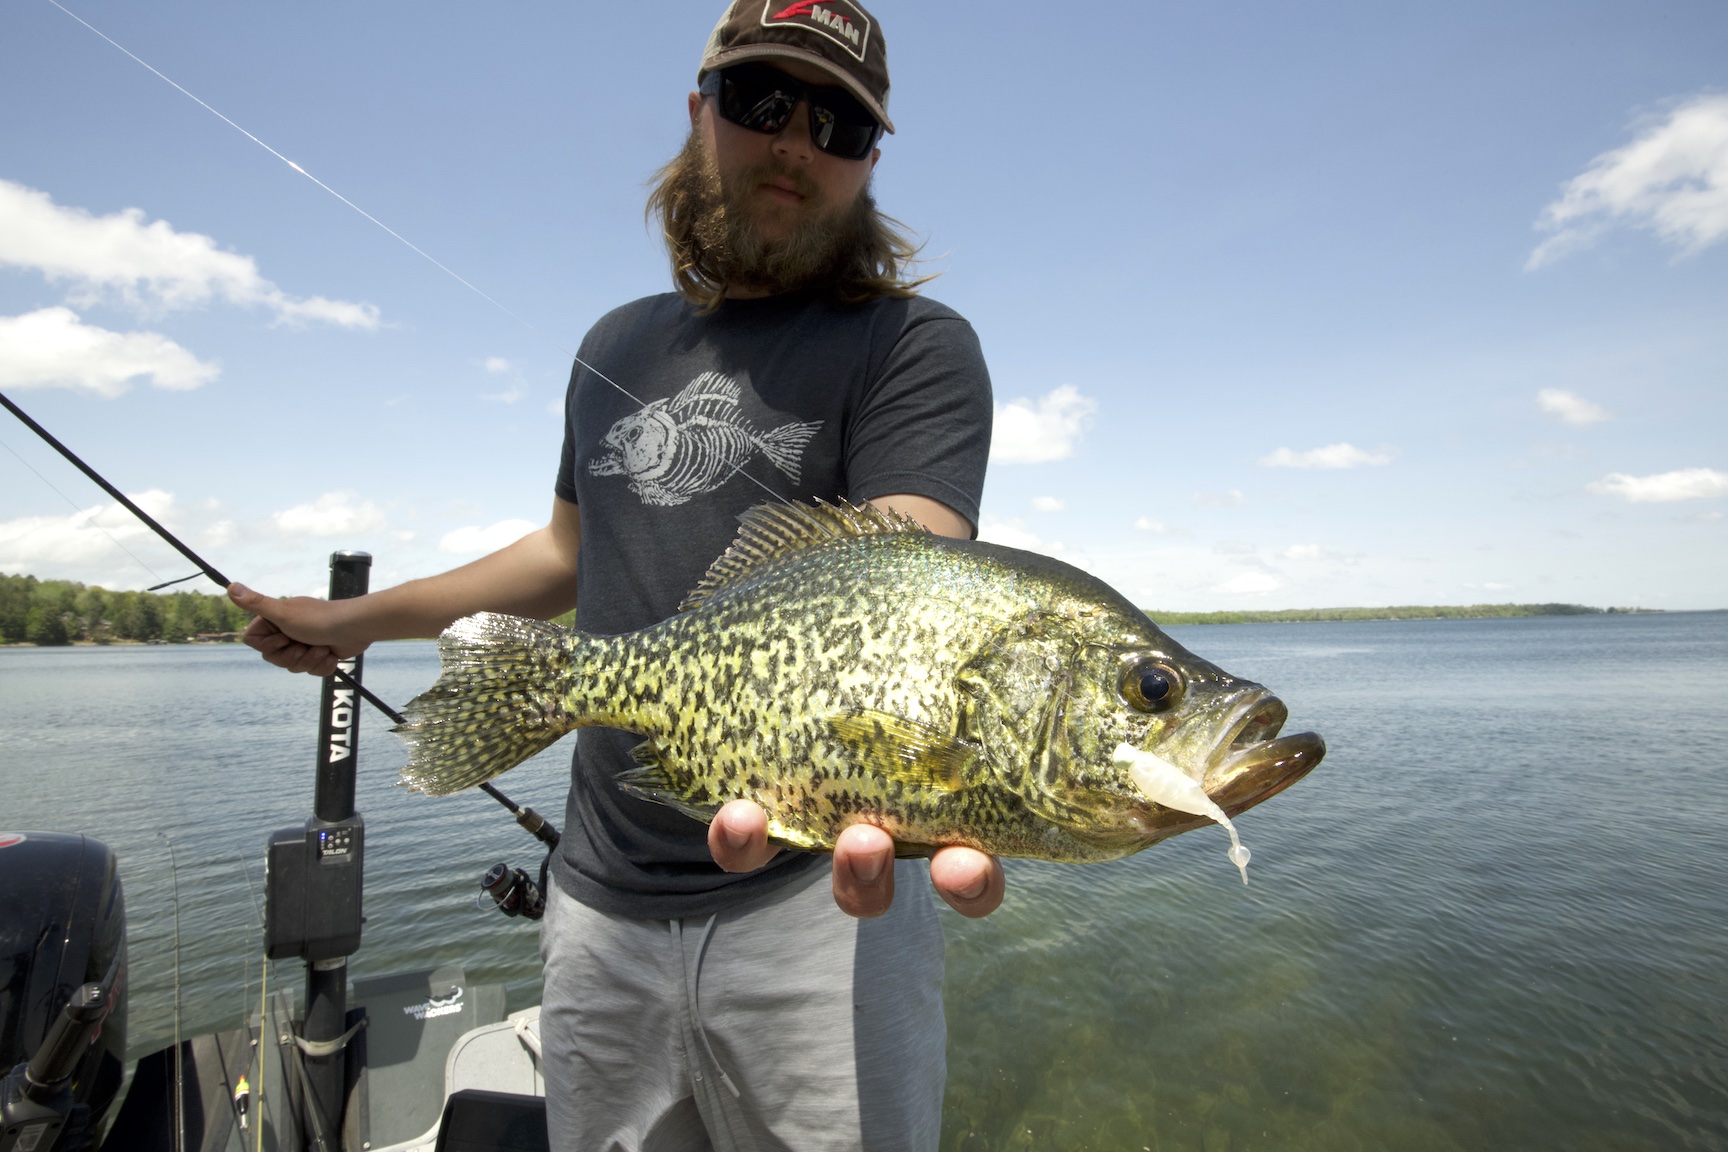 Your Guide to Spring Bank Fishing for Crappie